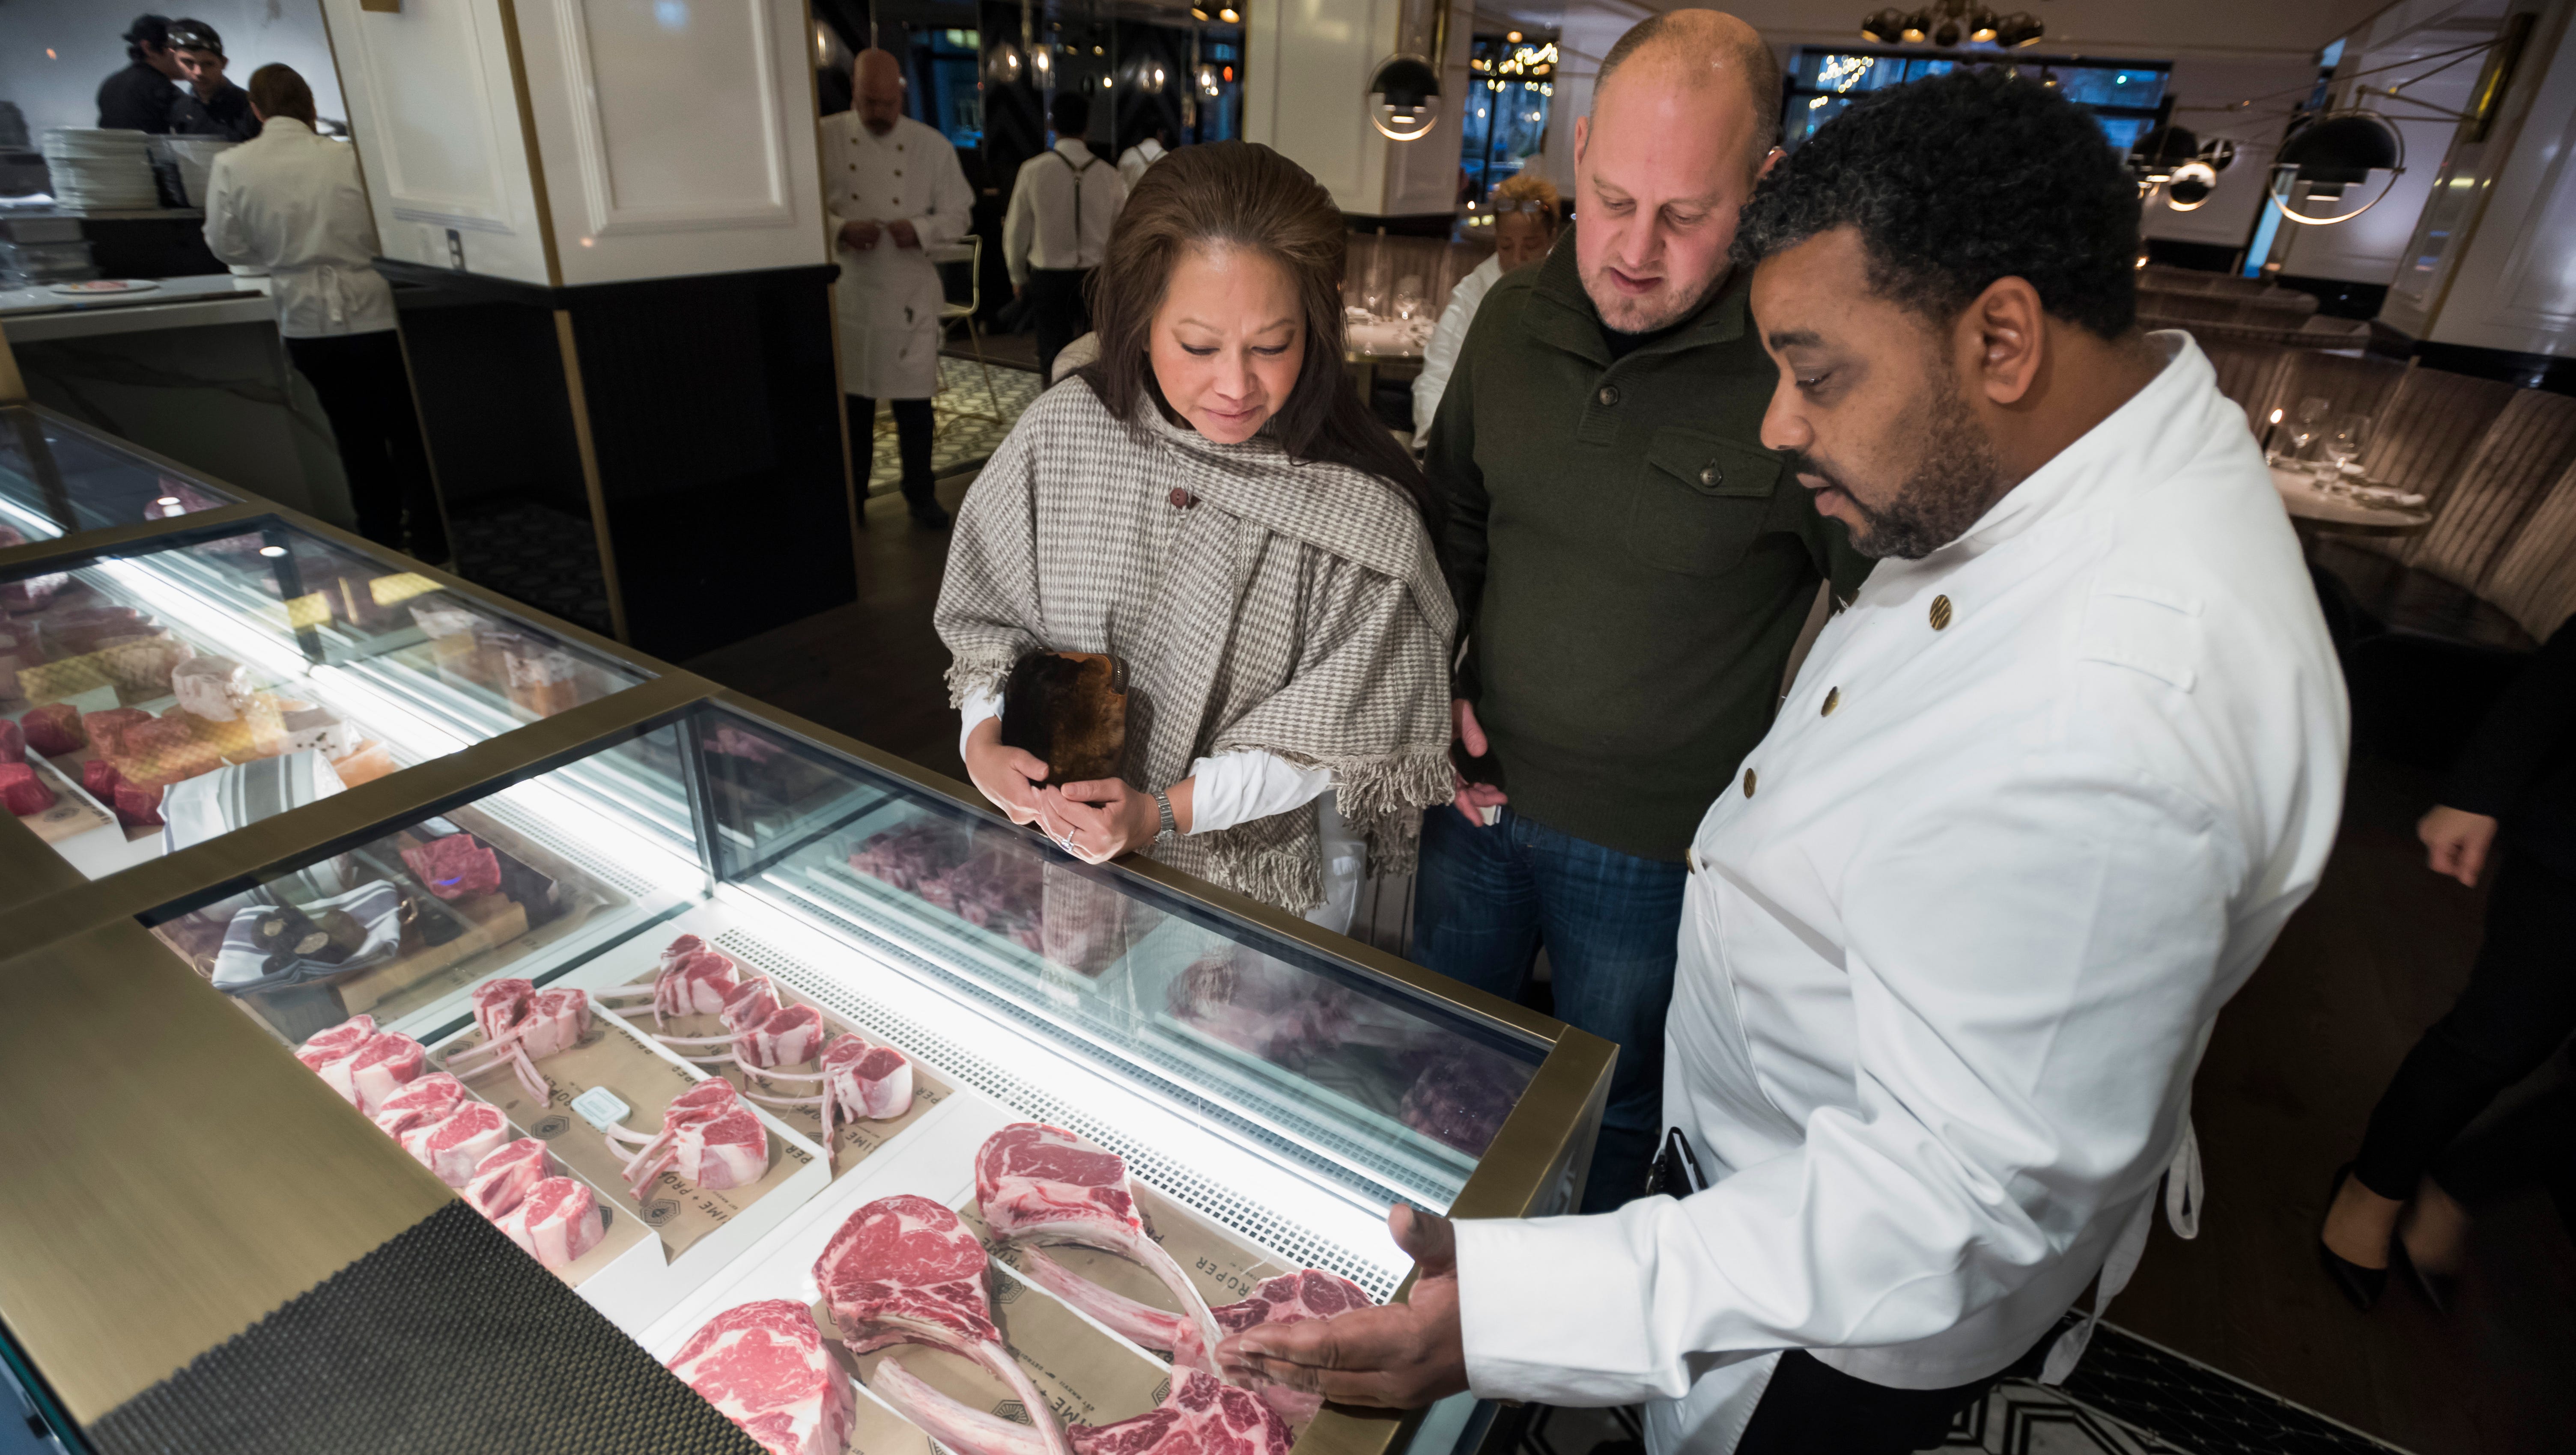 (From left) Paulina Aberle, and her husband, Scott, of Detroit, are shown the options inside the butcher display case by server Kenny Dias.